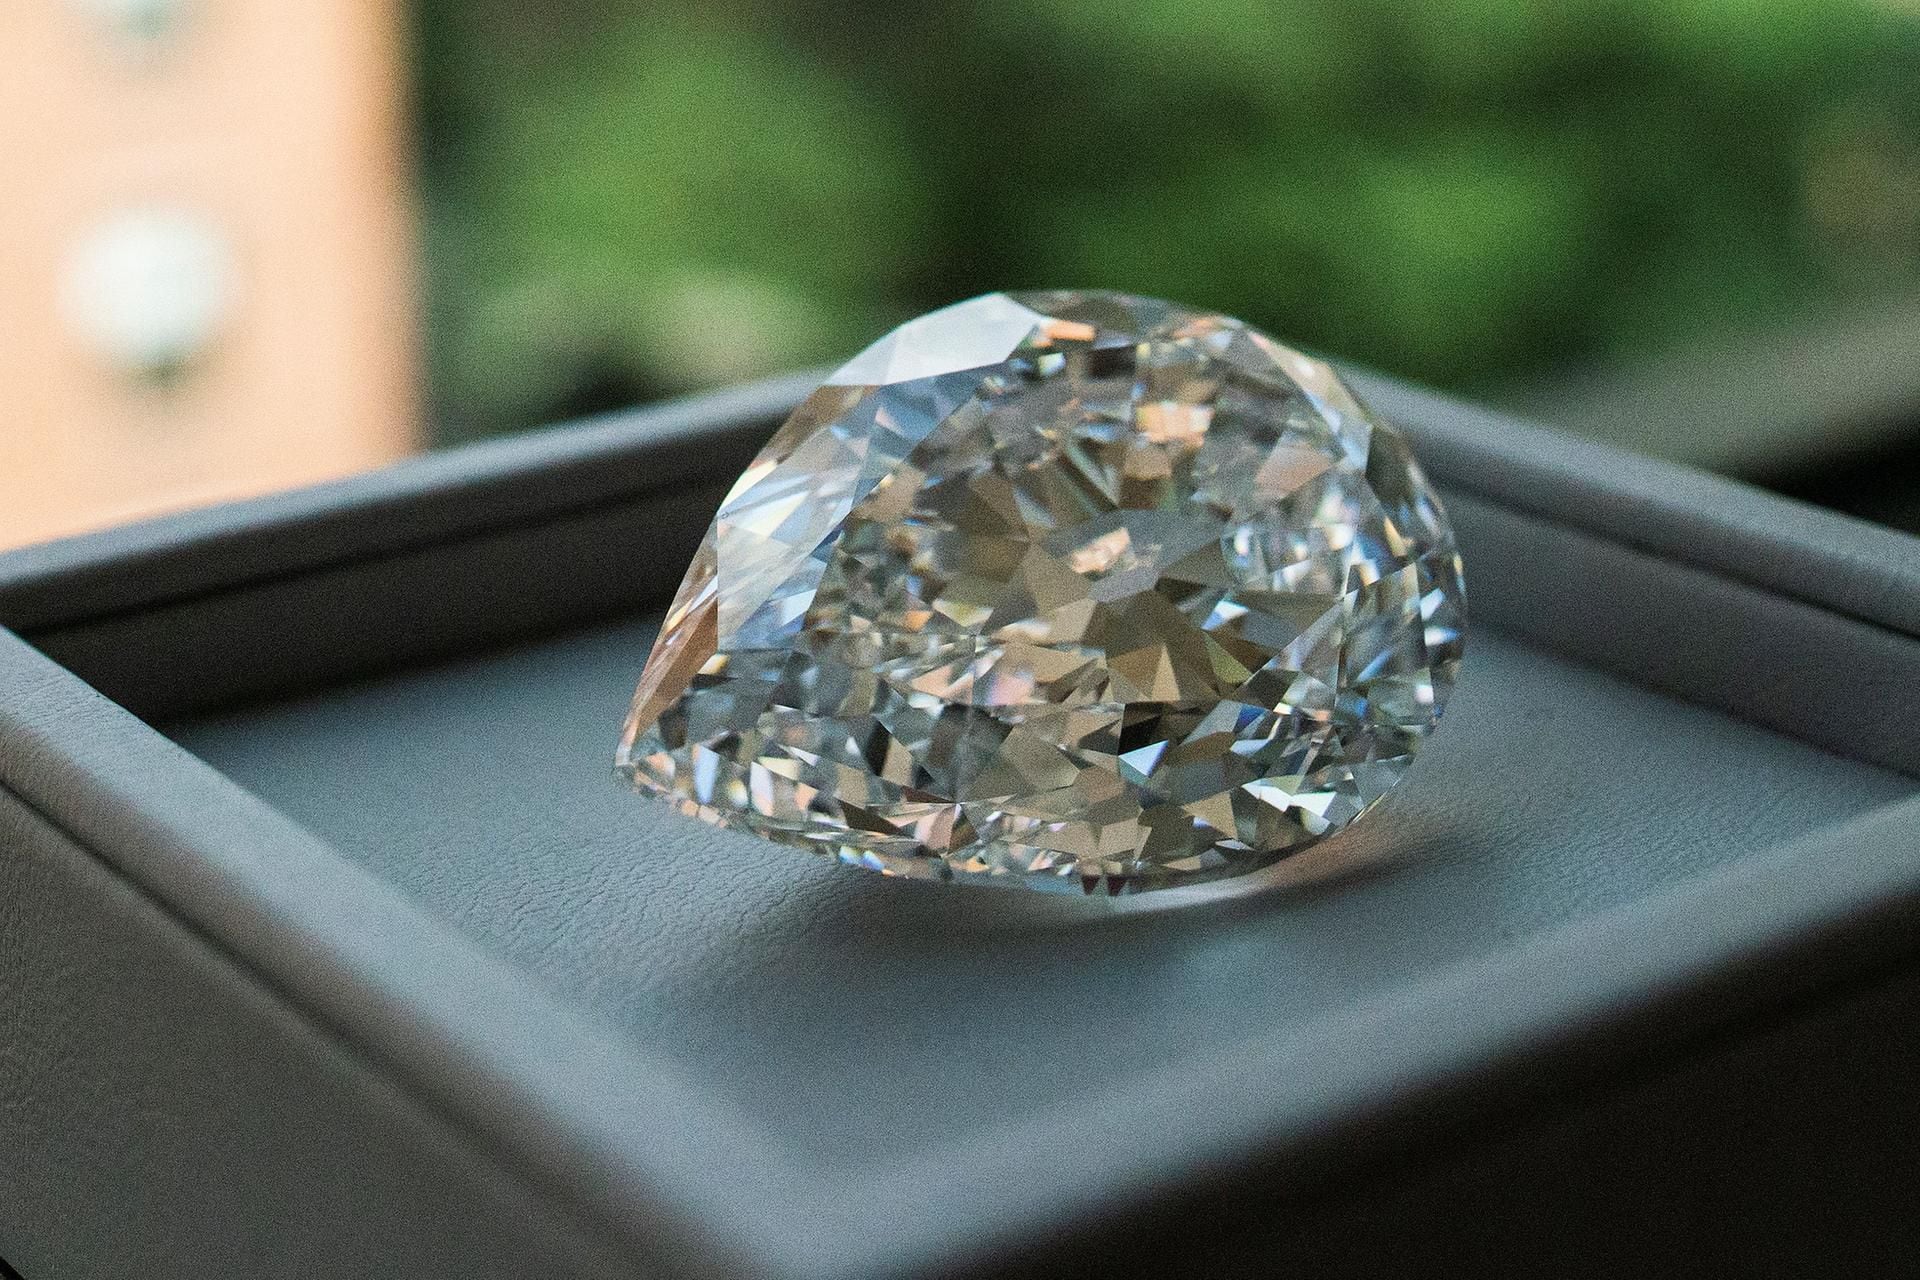 The 100-Carat 'Spectacle' Diamond Sells for $14M